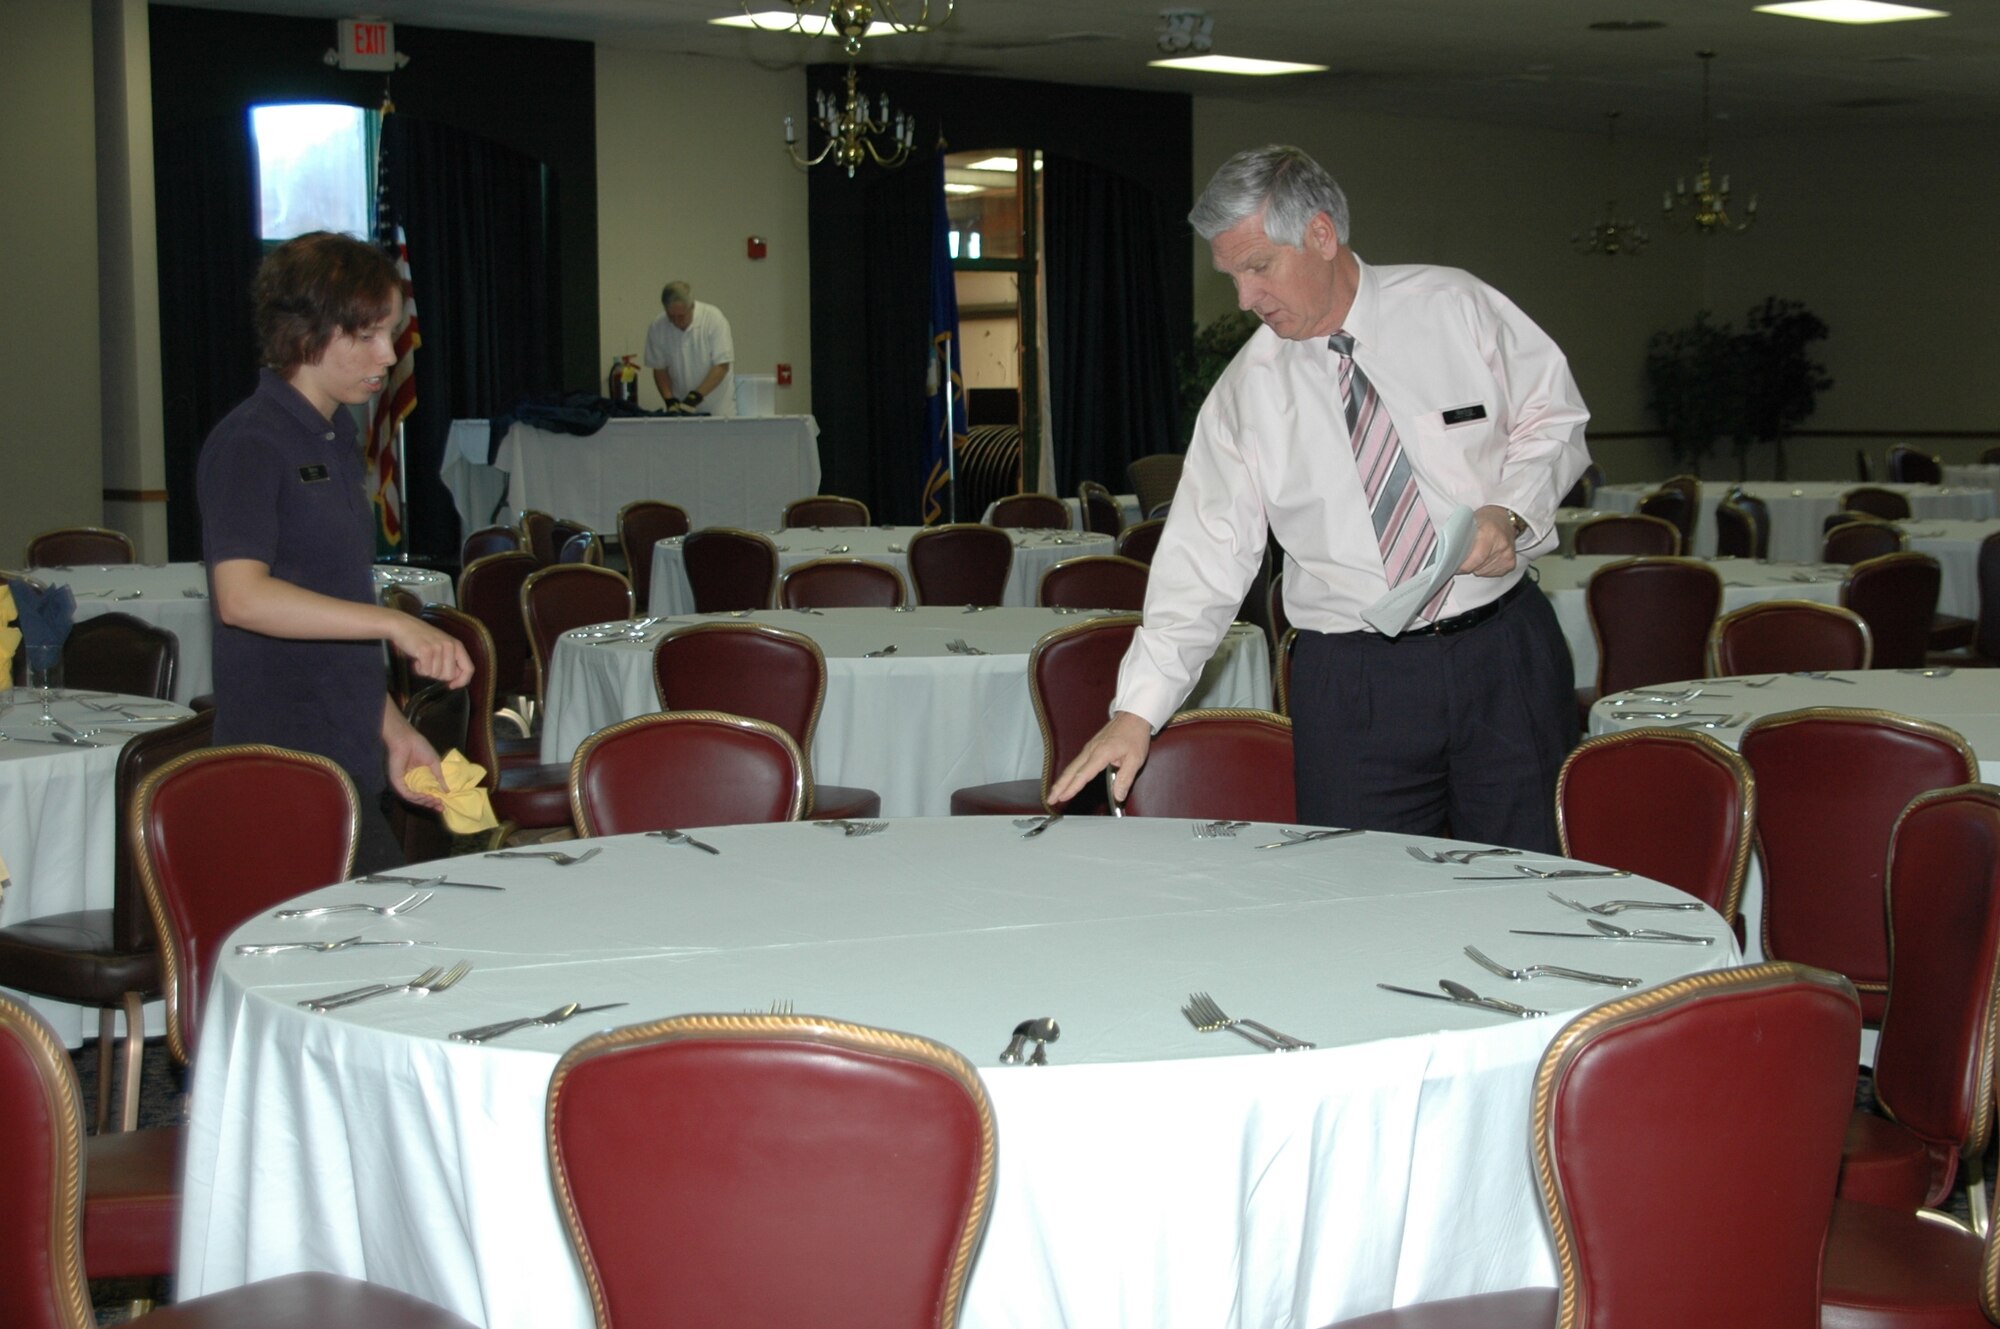 Garry Shaffer, Dakota's manager, helps Ms. Amber Green, Dakota's waitress, set tables prior to a banquet the club hosted.
Mr. Shaffer is the club's new manager and looks forward to revamping the club.